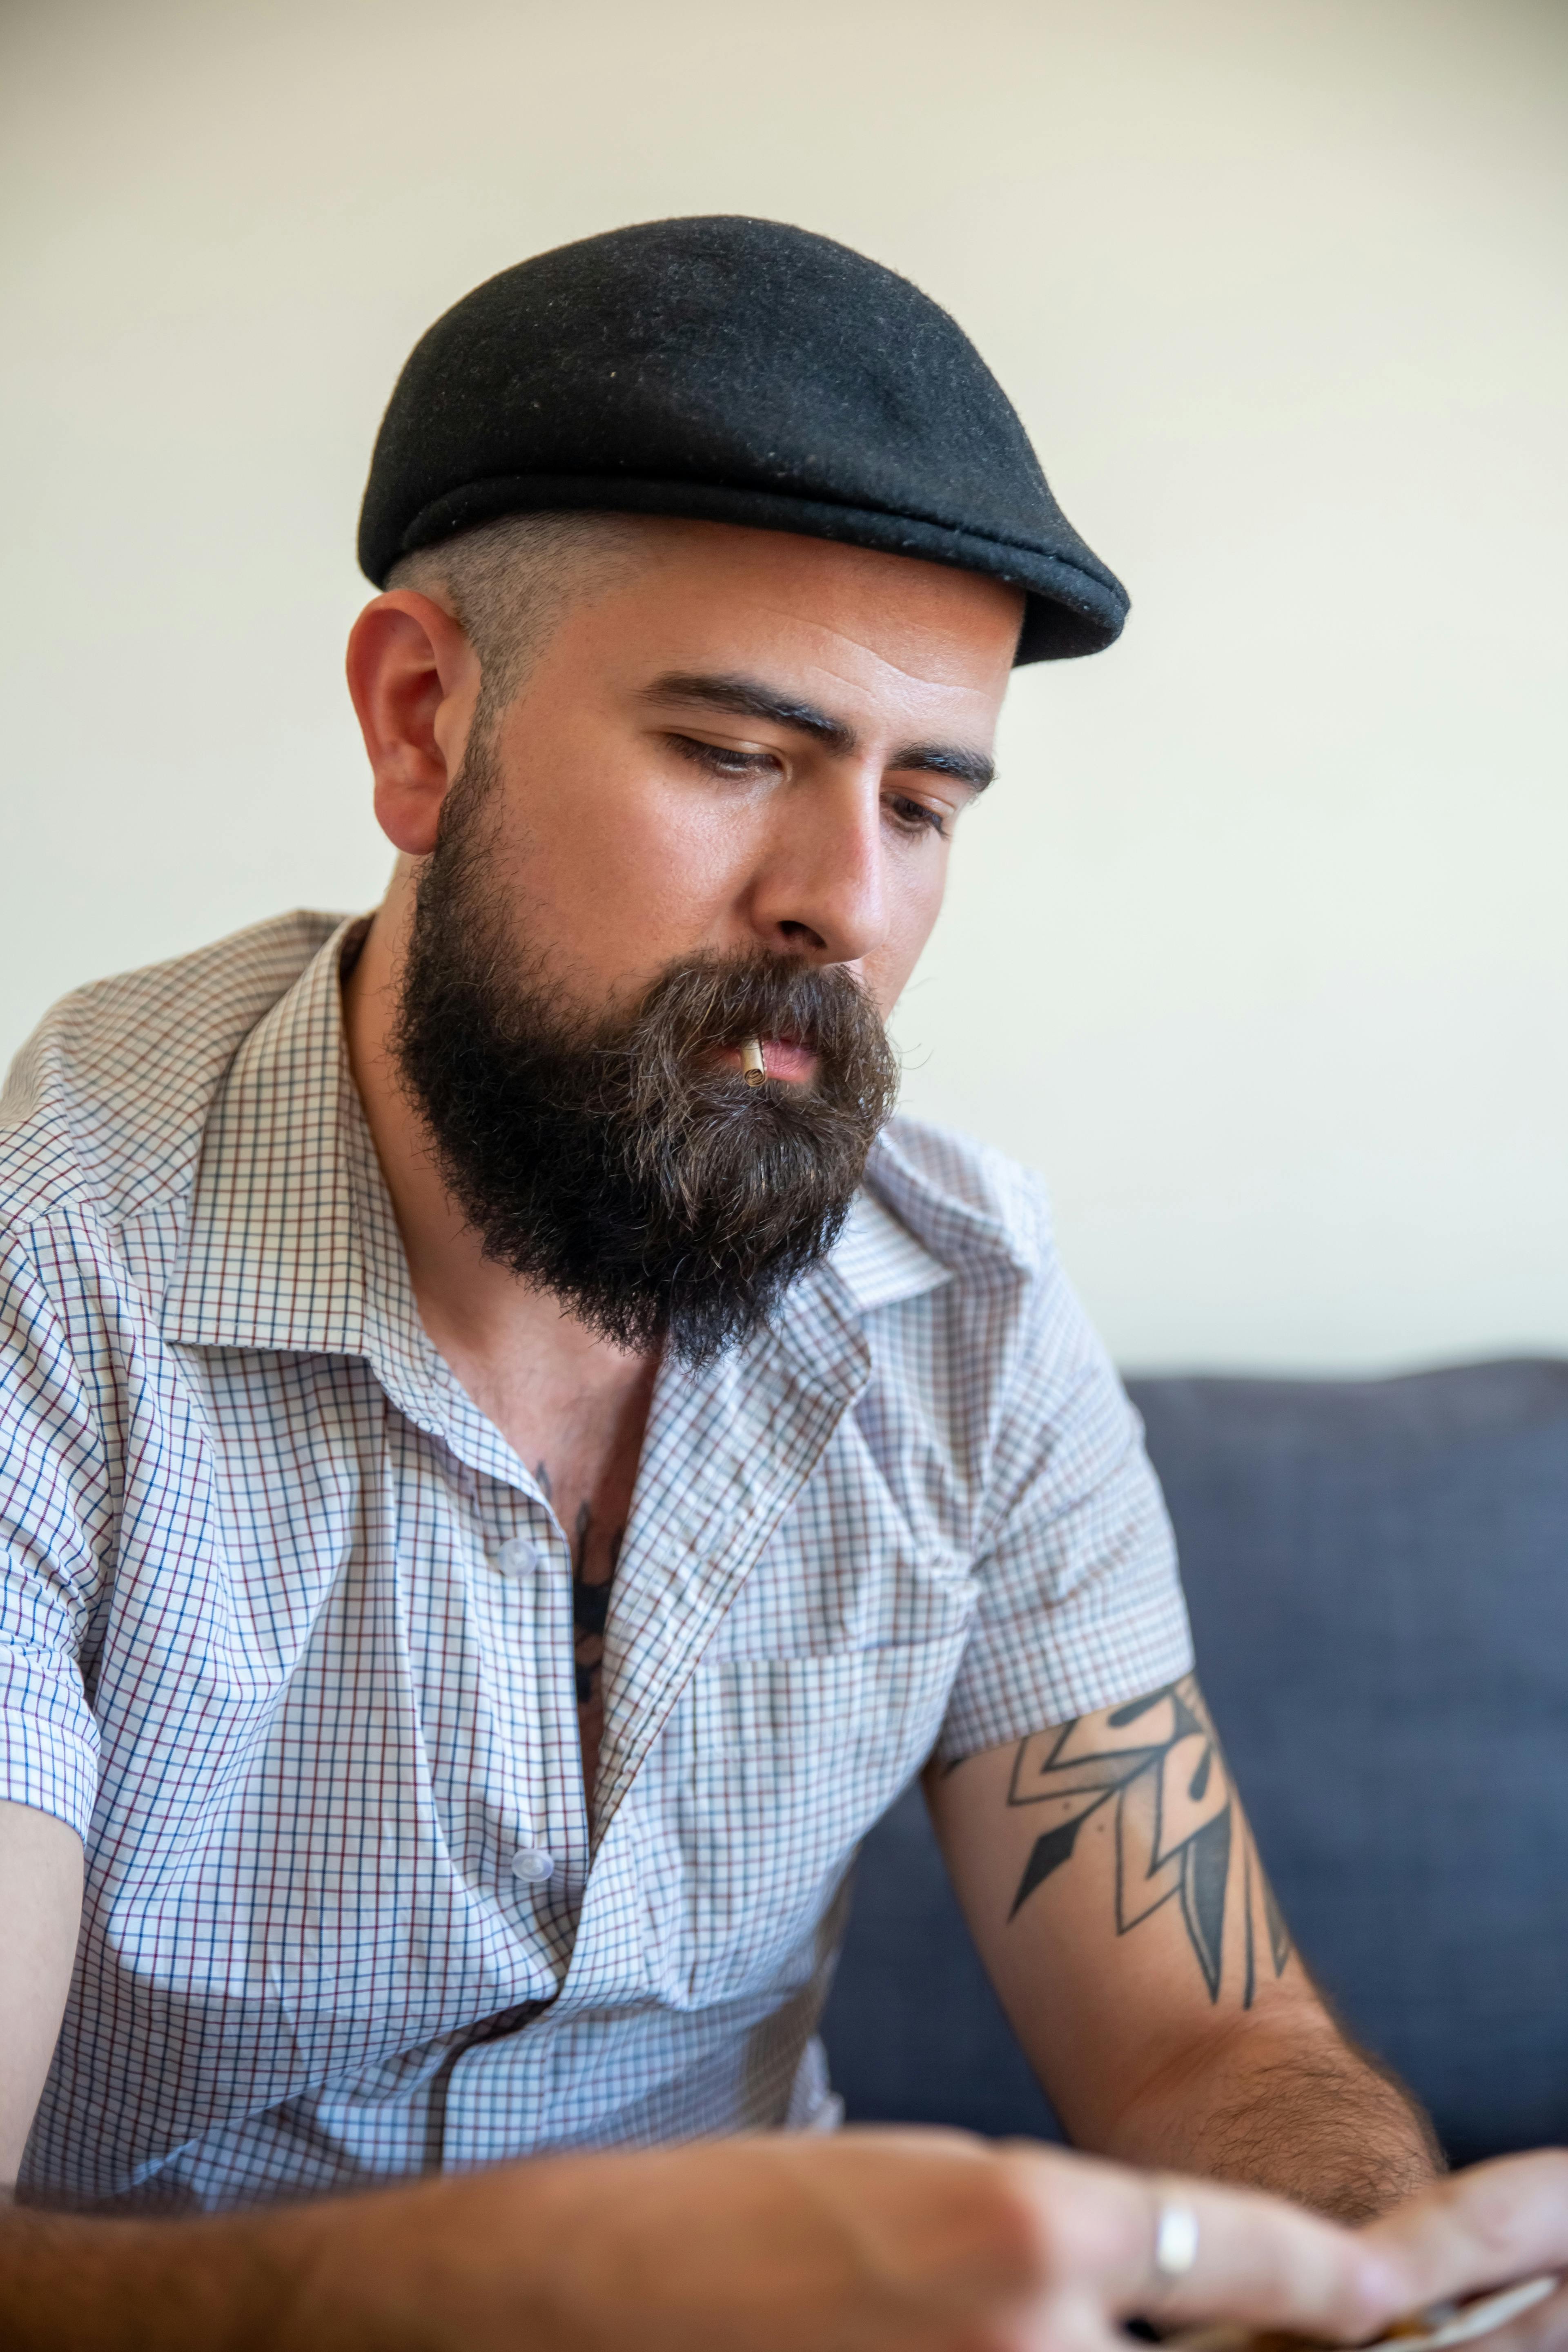 A Bearded Man with Flat Hat · Free Stock Photo